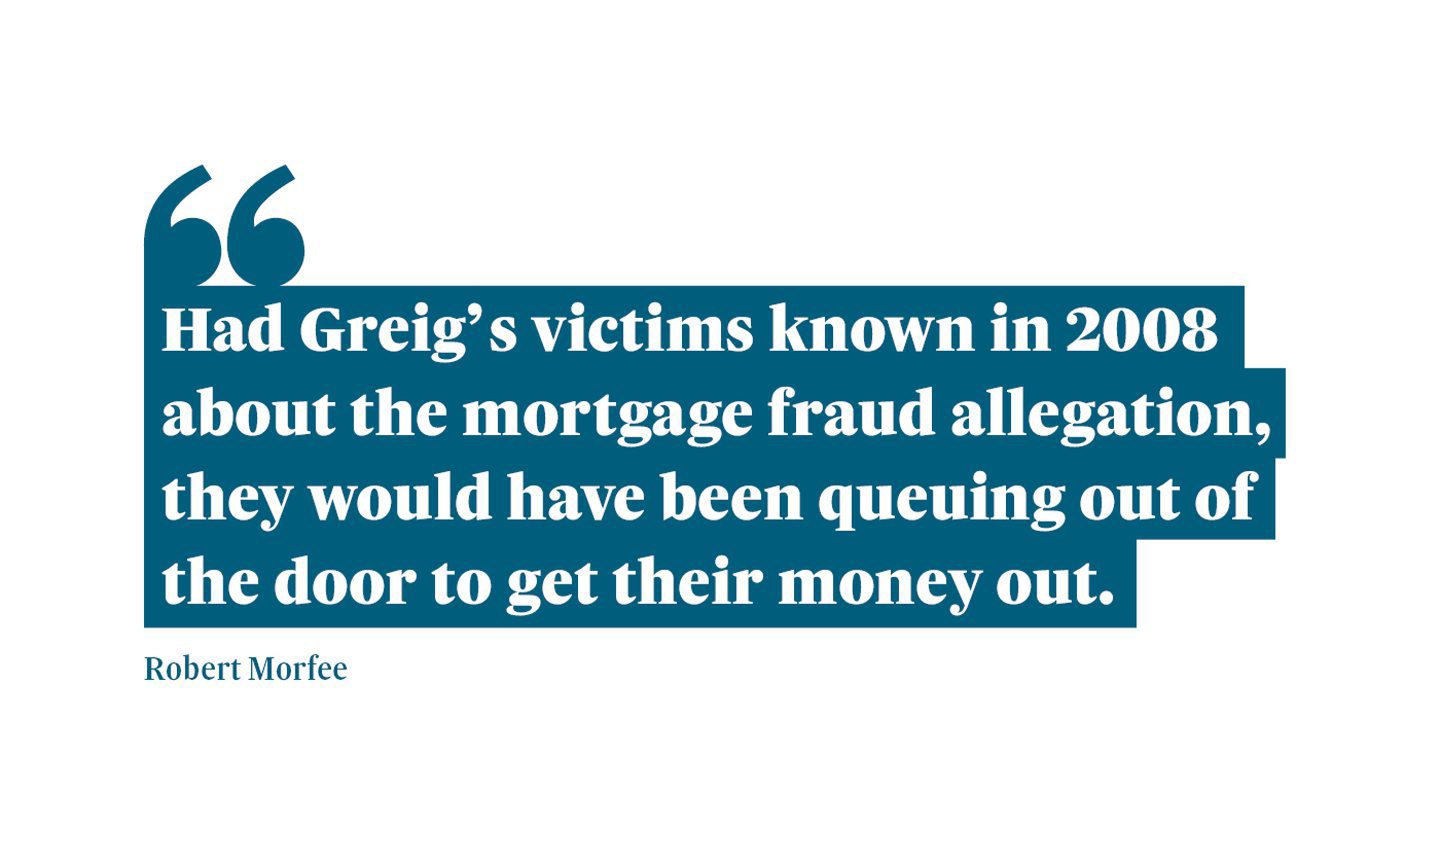 A graphic that reads: "Had Greig’s victims known in 2008 about the mortgage fraud allegation, they would have been queuing out of the door to get their money out.” A quote from Robert Morfee.